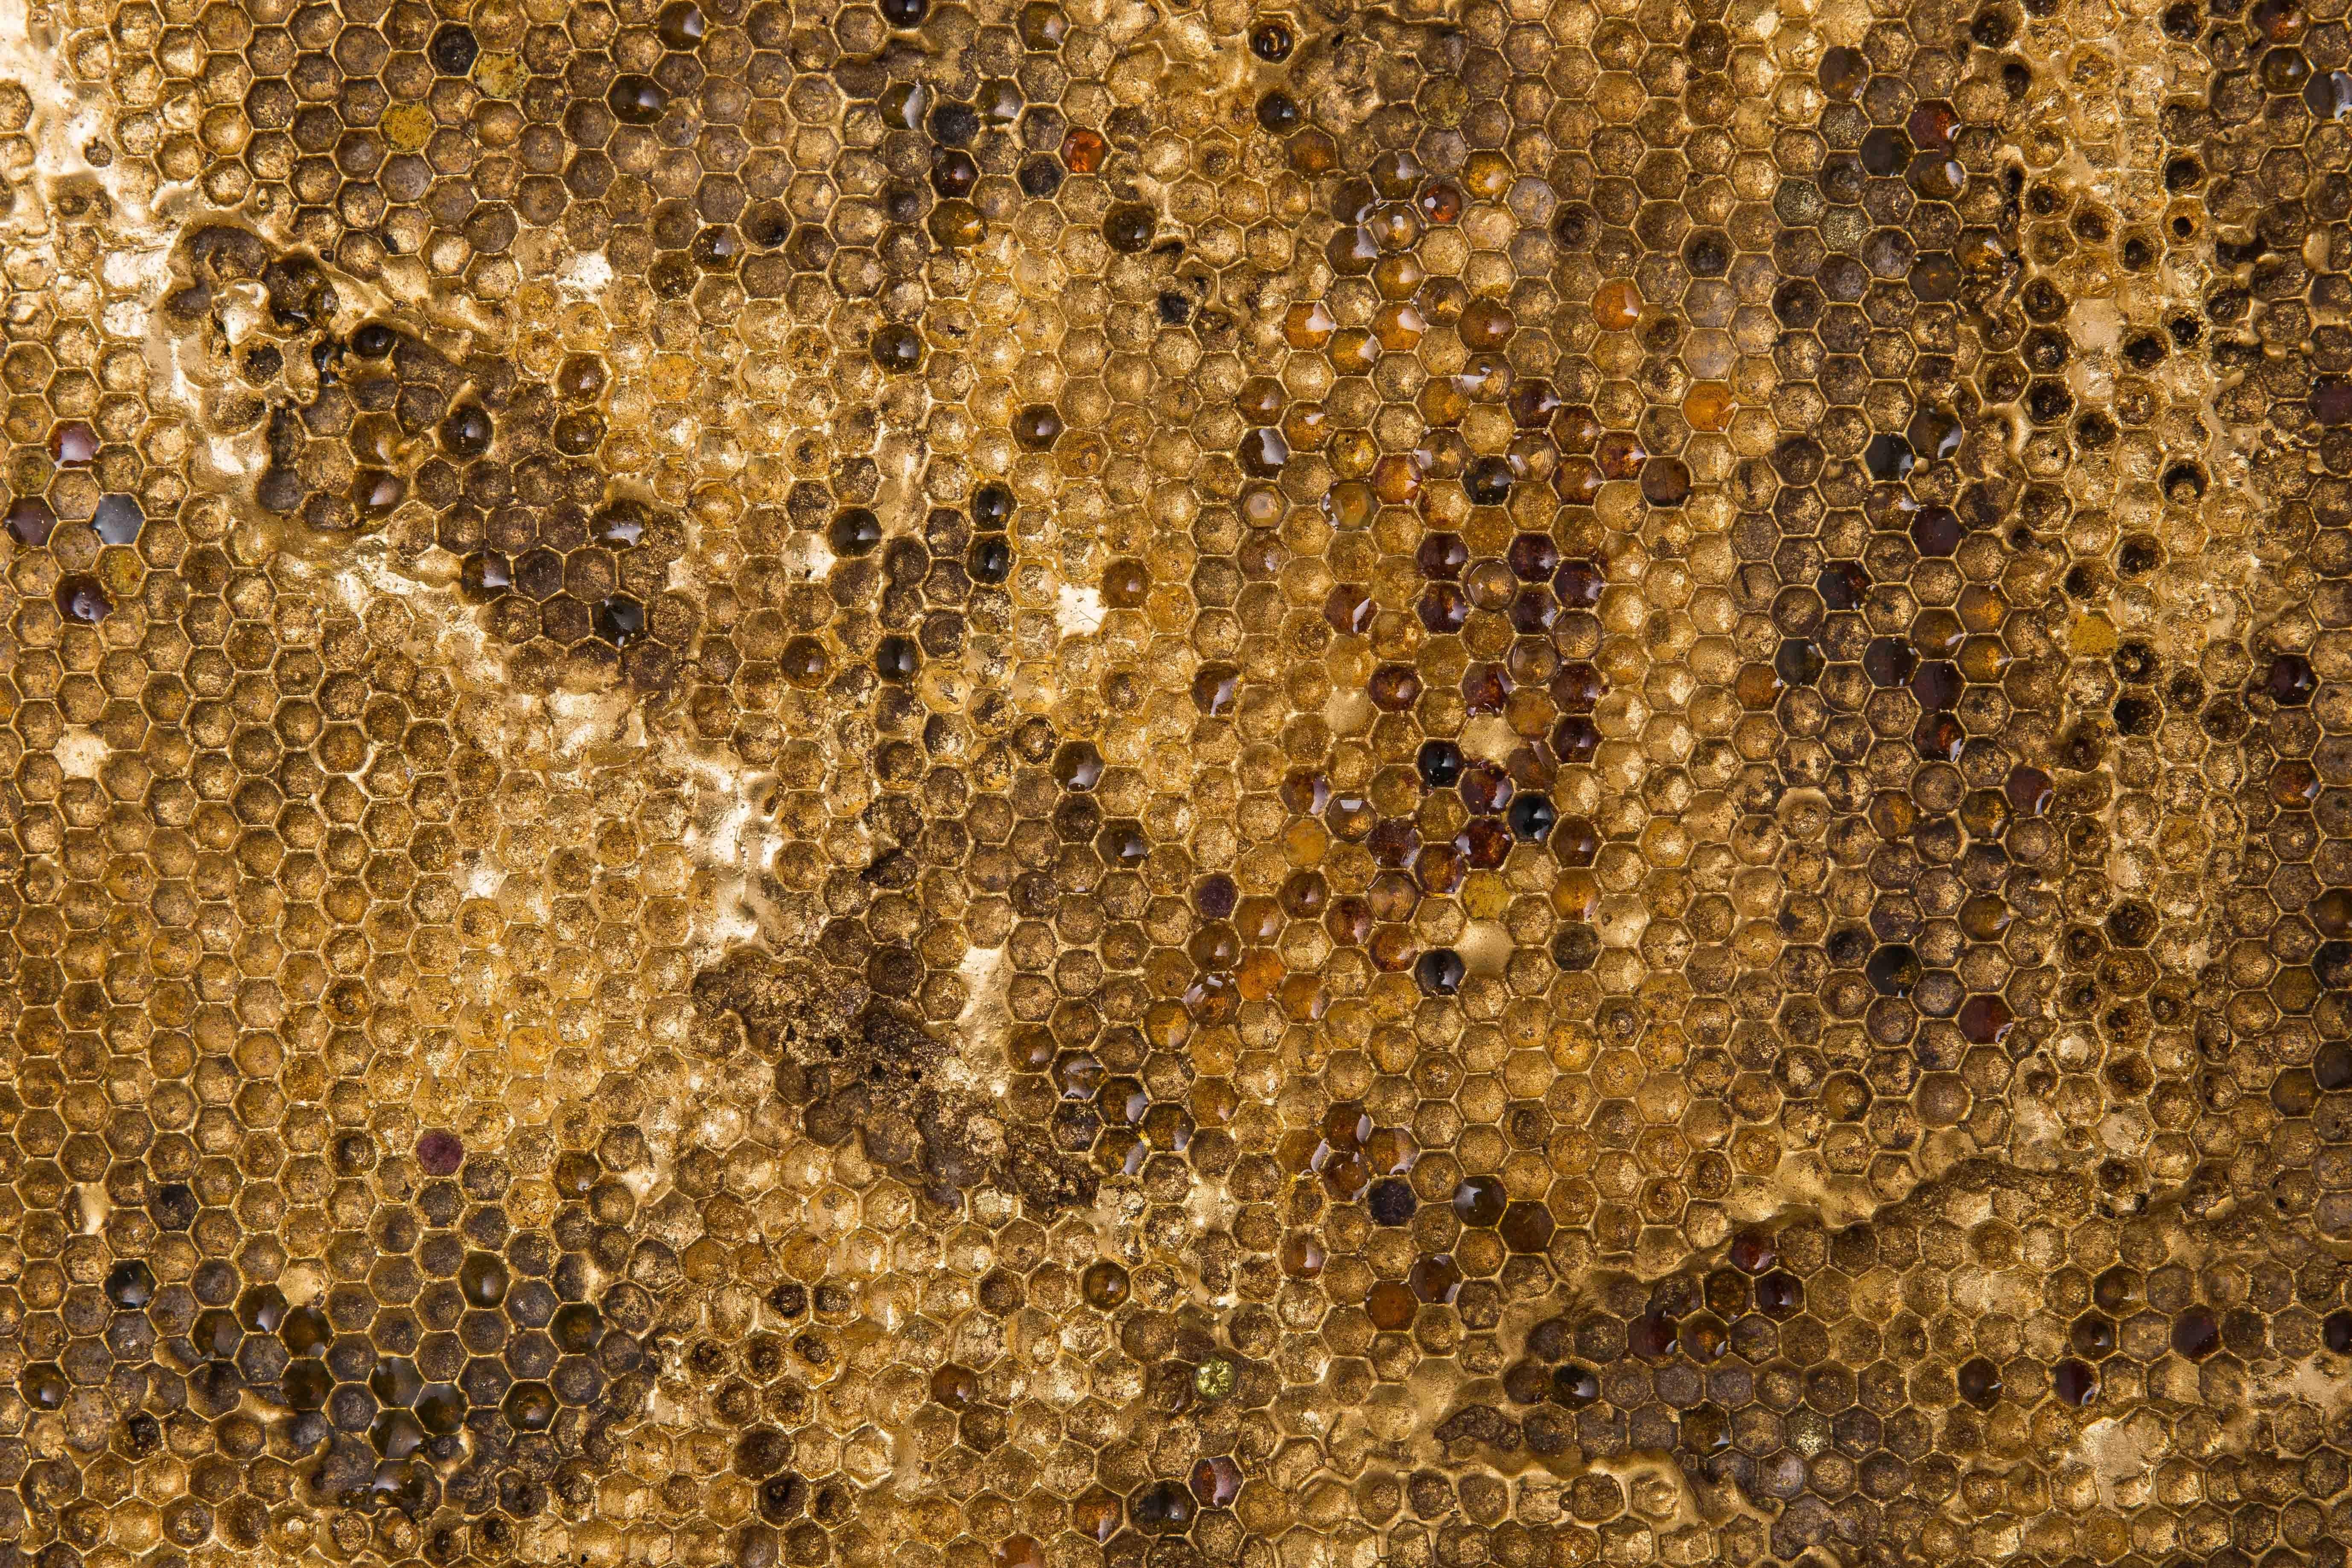 Hoard masterfully explores the exquisite nature of honeycombs using cast bronze, gilded plaster as well as precious and semi-precious stones. Coryndon, who says that natural forms are always at the heart of her work, became interested in bees after